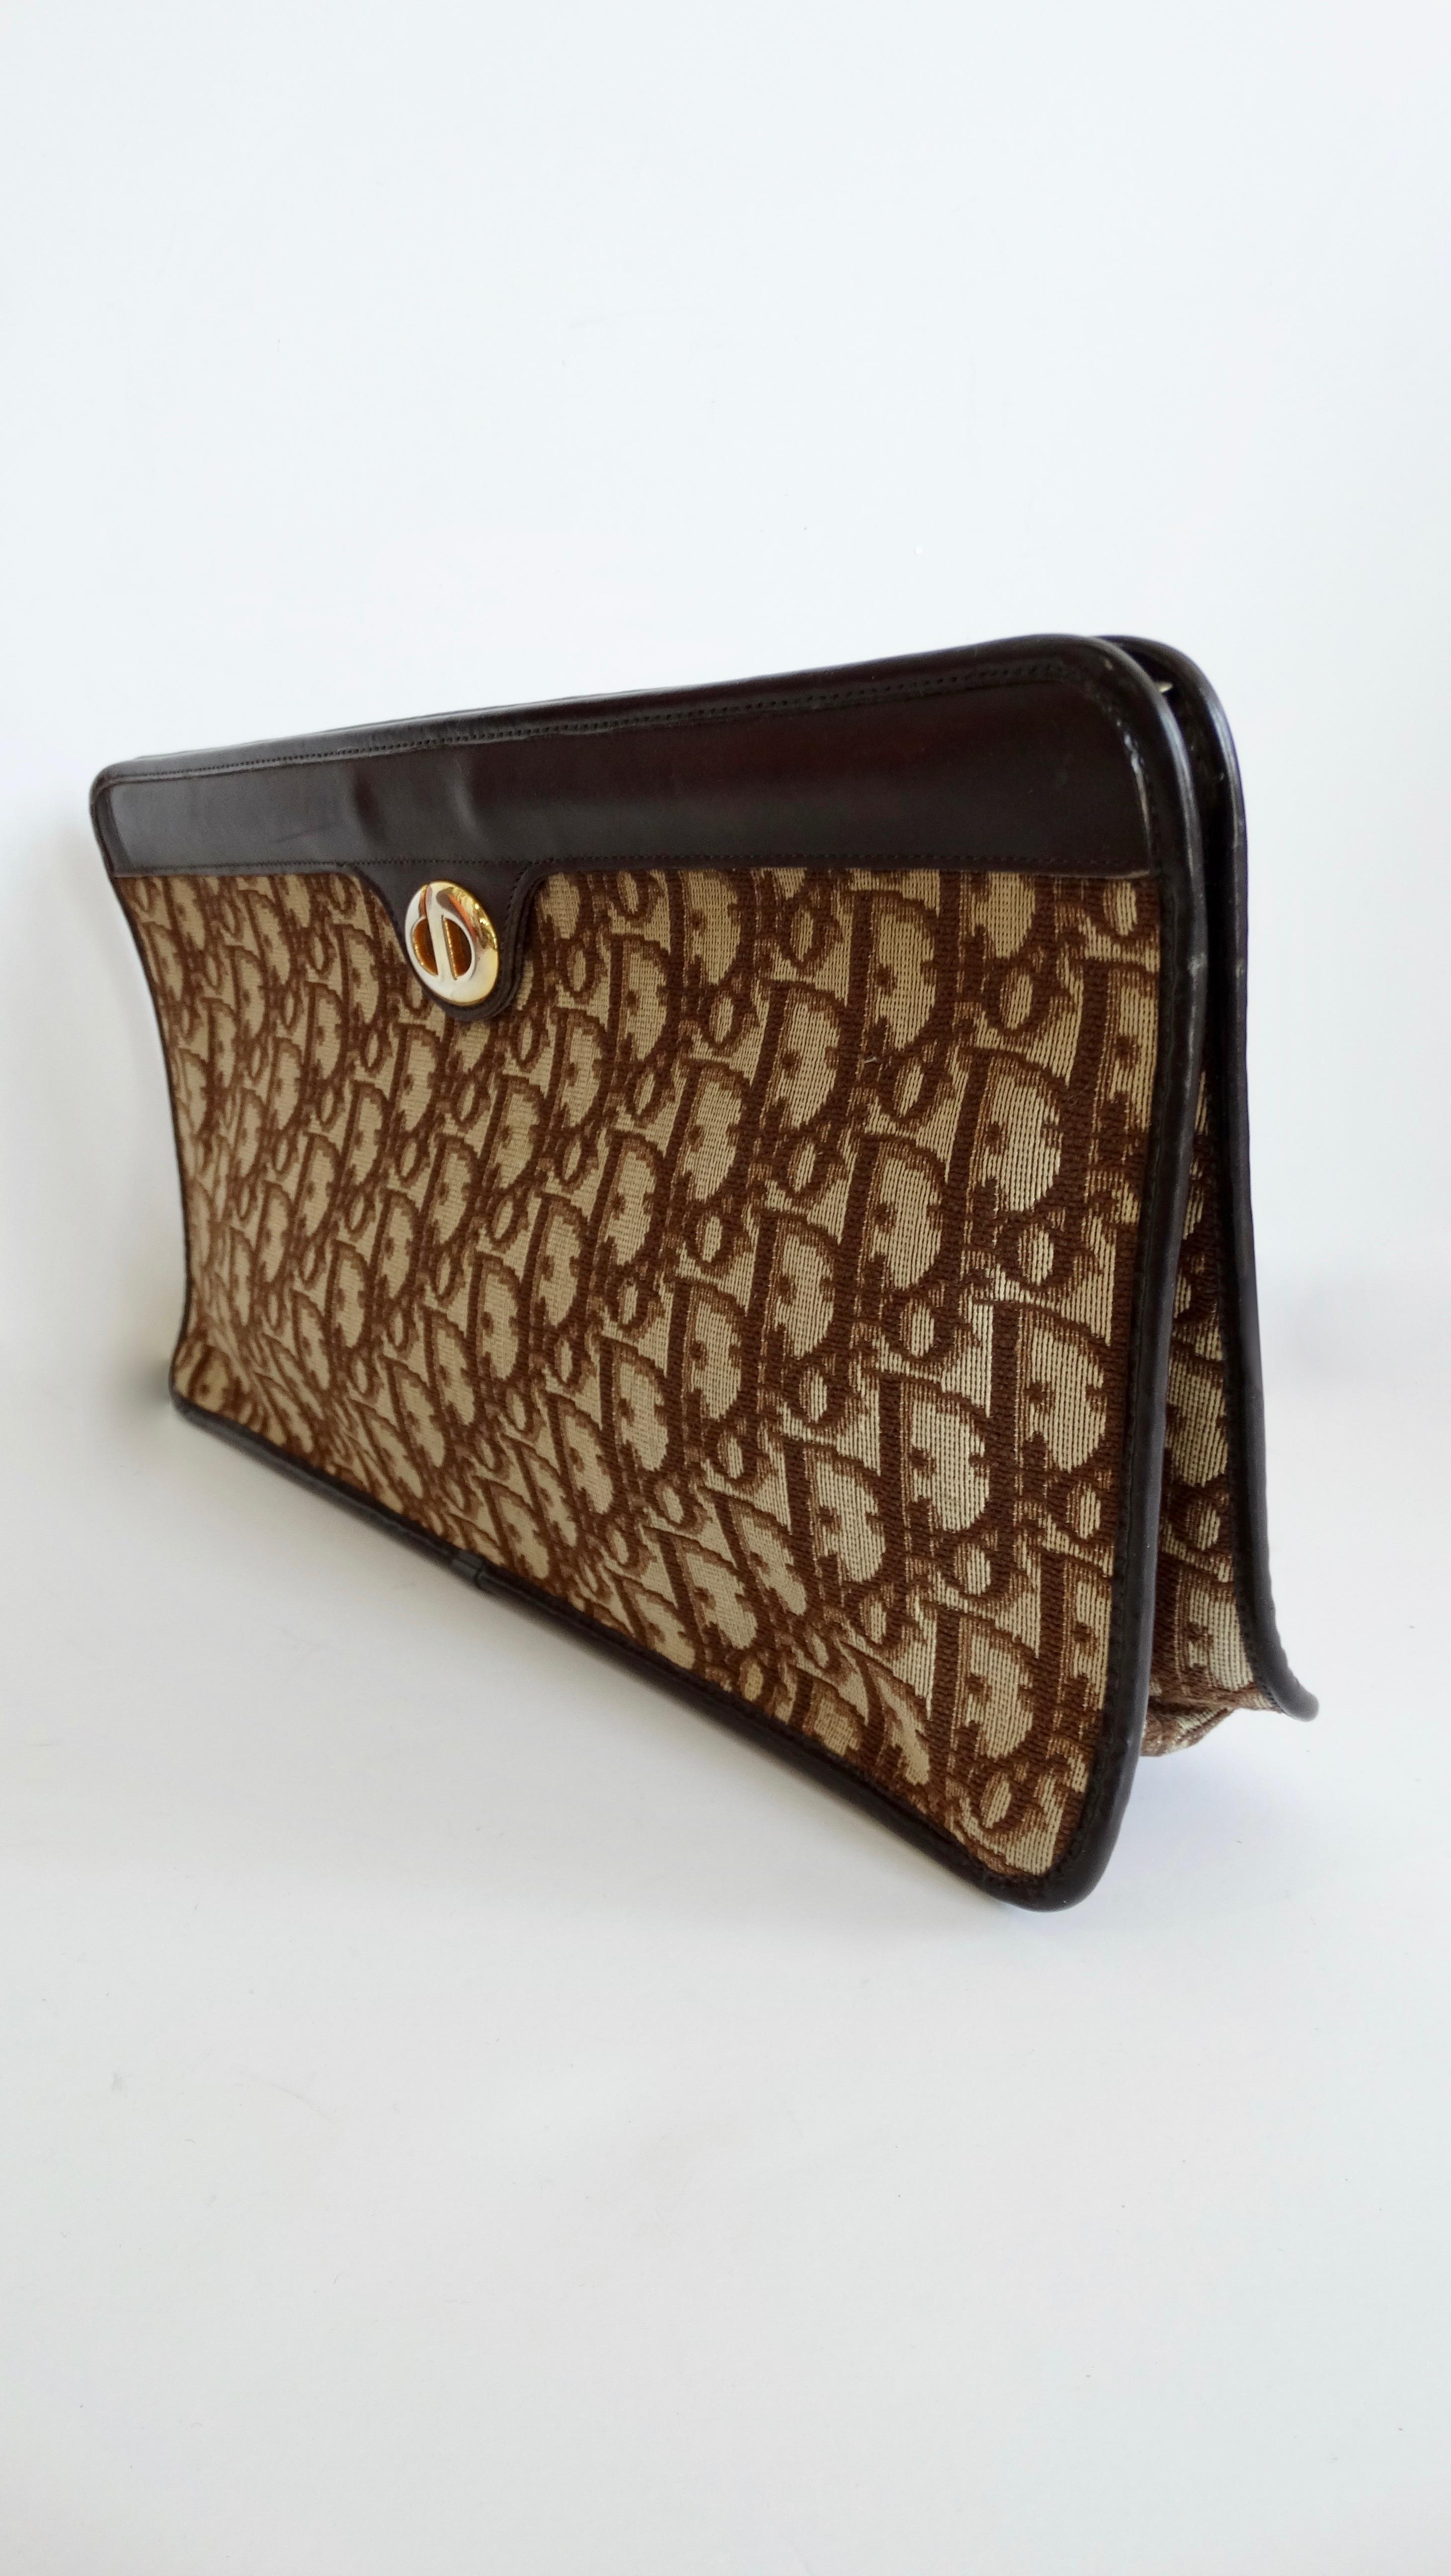 Complete your bag collection with this monogram Dior gem! Circa 1970s, this jacquard canvas clutch features the iconic Dior monogram in brown and beige, brown leather trim and the Christian Dior initials emblem in gold hardware on the front face.